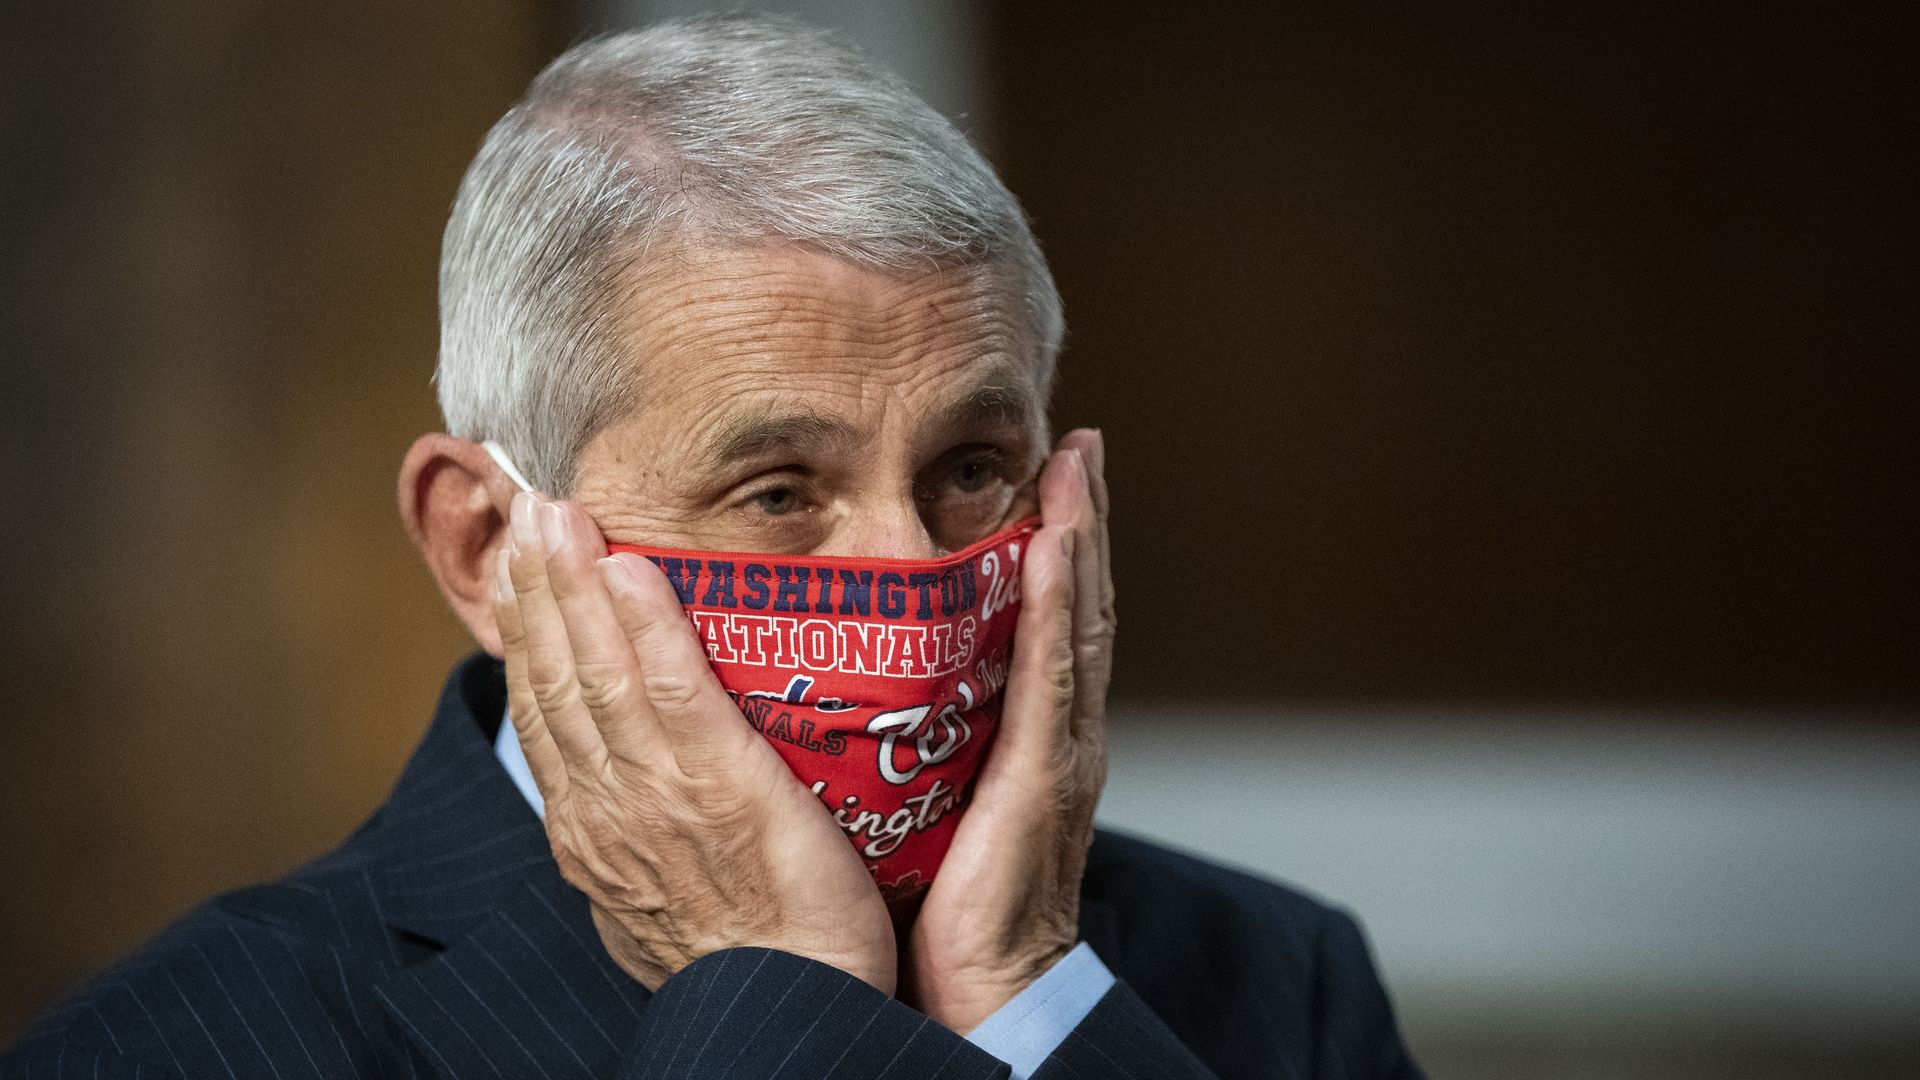 Anthony Fauci, director of the National Institute of Allergy and Infectious Diseases, adjusts a Washington Nationals protective mask while arriving to a Senate hearing in June